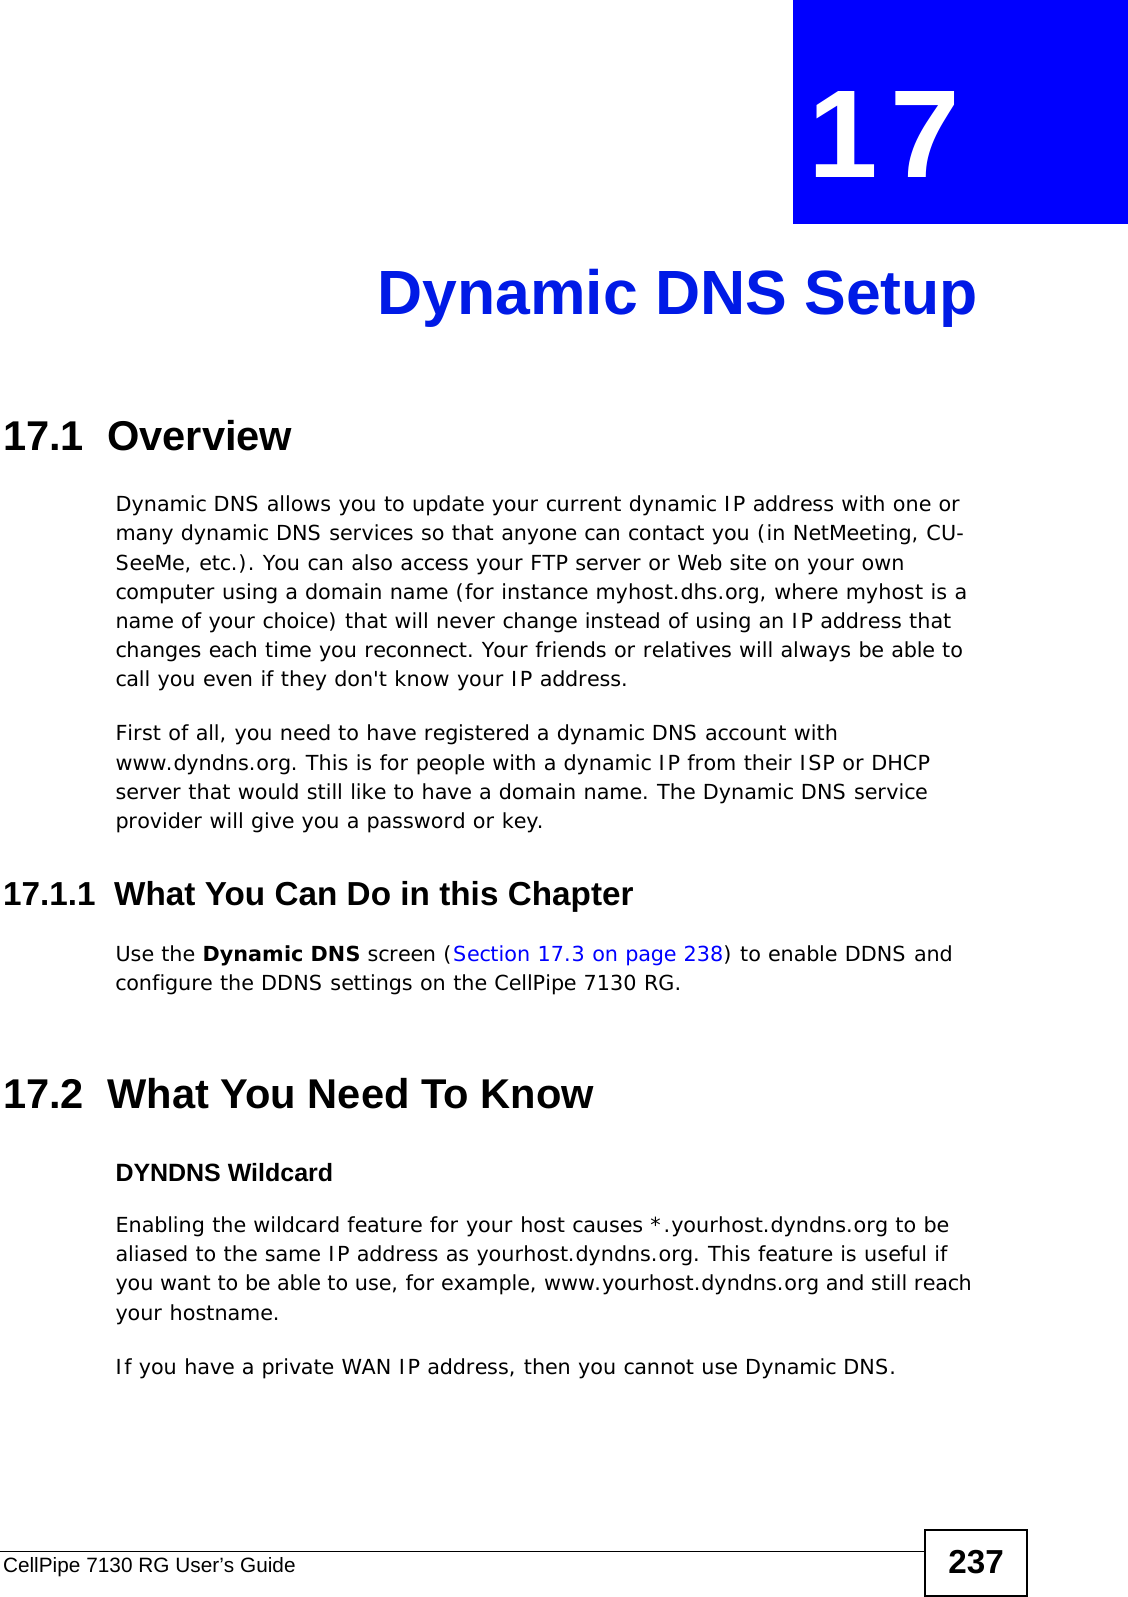 CellPipe 7130 RG User’s Guide 237CHAPTER  17 Dynamic DNS Setup17.1  Overview Dynamic DNS allows you to update your current dynamic IP address with one or many dynamic DNS services so that anyone can contact you (in NetMeeting, CU-SeeMe, etc.). You can also access your FTP server or Web site on your own computer using a domain name (for instance myhost.dhs.org, where myhost is a name of your choice) that will never change instead of using an IP address that changes each time you reconnect. Your friends or relatives will always be able to call you even if they don&apos;t know your IP address.First of all, you need to have registered a dynamic DNS account with www.dyndns.org. This is for people with a dynamic IP from their ISP or DHCP server that would still like to have a domain name. The Dynamic DNS service provider will give you a password or key. 17.1.1  What You Can Do in this ChapterUse the Dynamic DNS screen (Section 17.3 on page 238) to enable DDNS and configure the DDNS settings on the CellPipe 7130 RG.17.2  What You Need To KnowDYNDNS WildcardEnabling the wildcard feature for your host causes *.yourhost.dyndns.org to be aliased to the same IP address as yourhost.dyndns.org. This feature is useful if you want to be able to use, for example, www.yourhost.dyndns.org and still reach your hostname.If you have a private WAN IP address, then you cannot use Dynamic DNS.